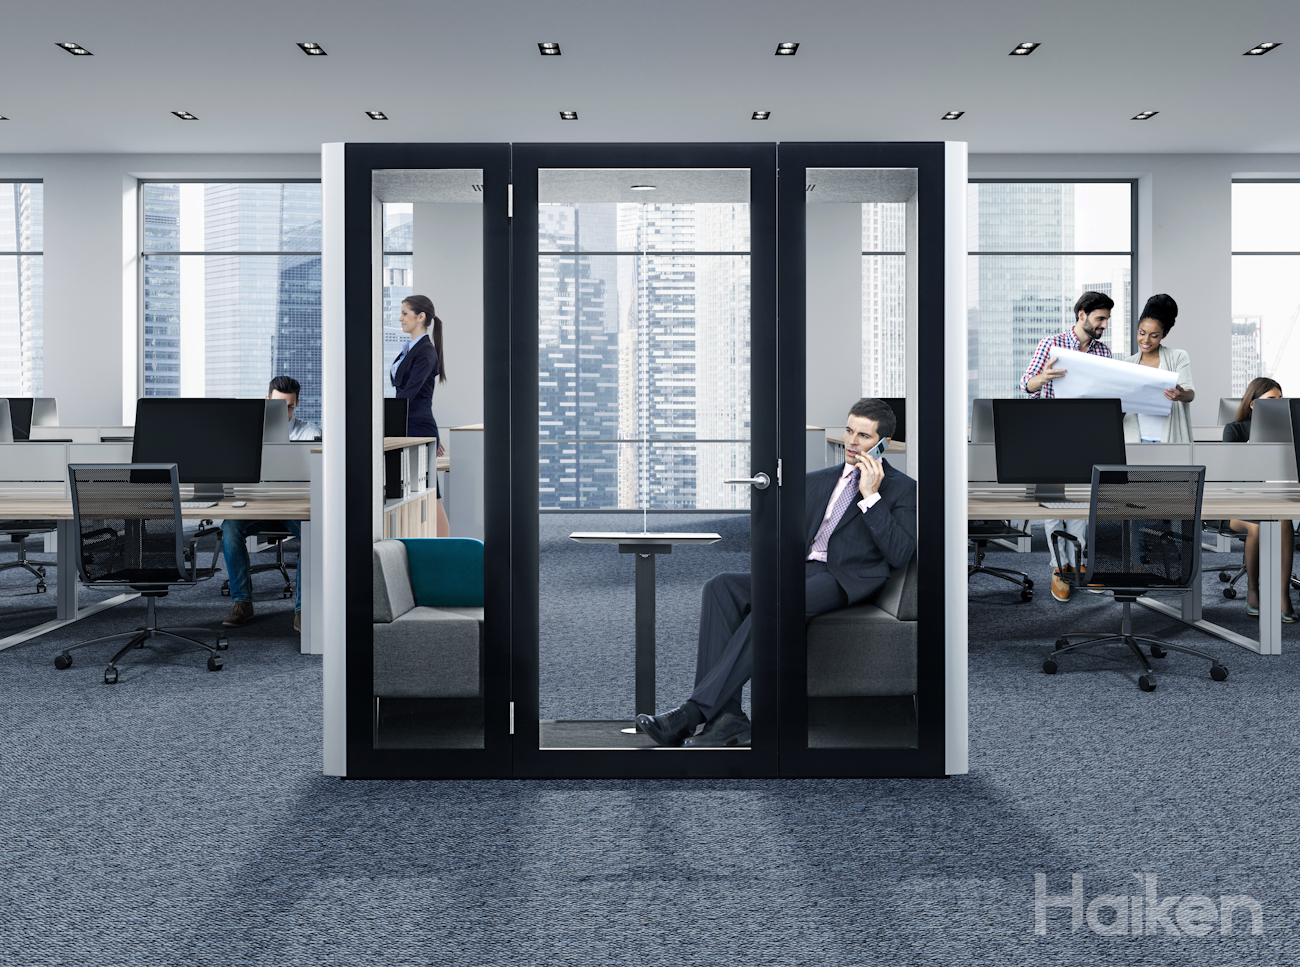 5 ways acoustic pods can improve your working environment